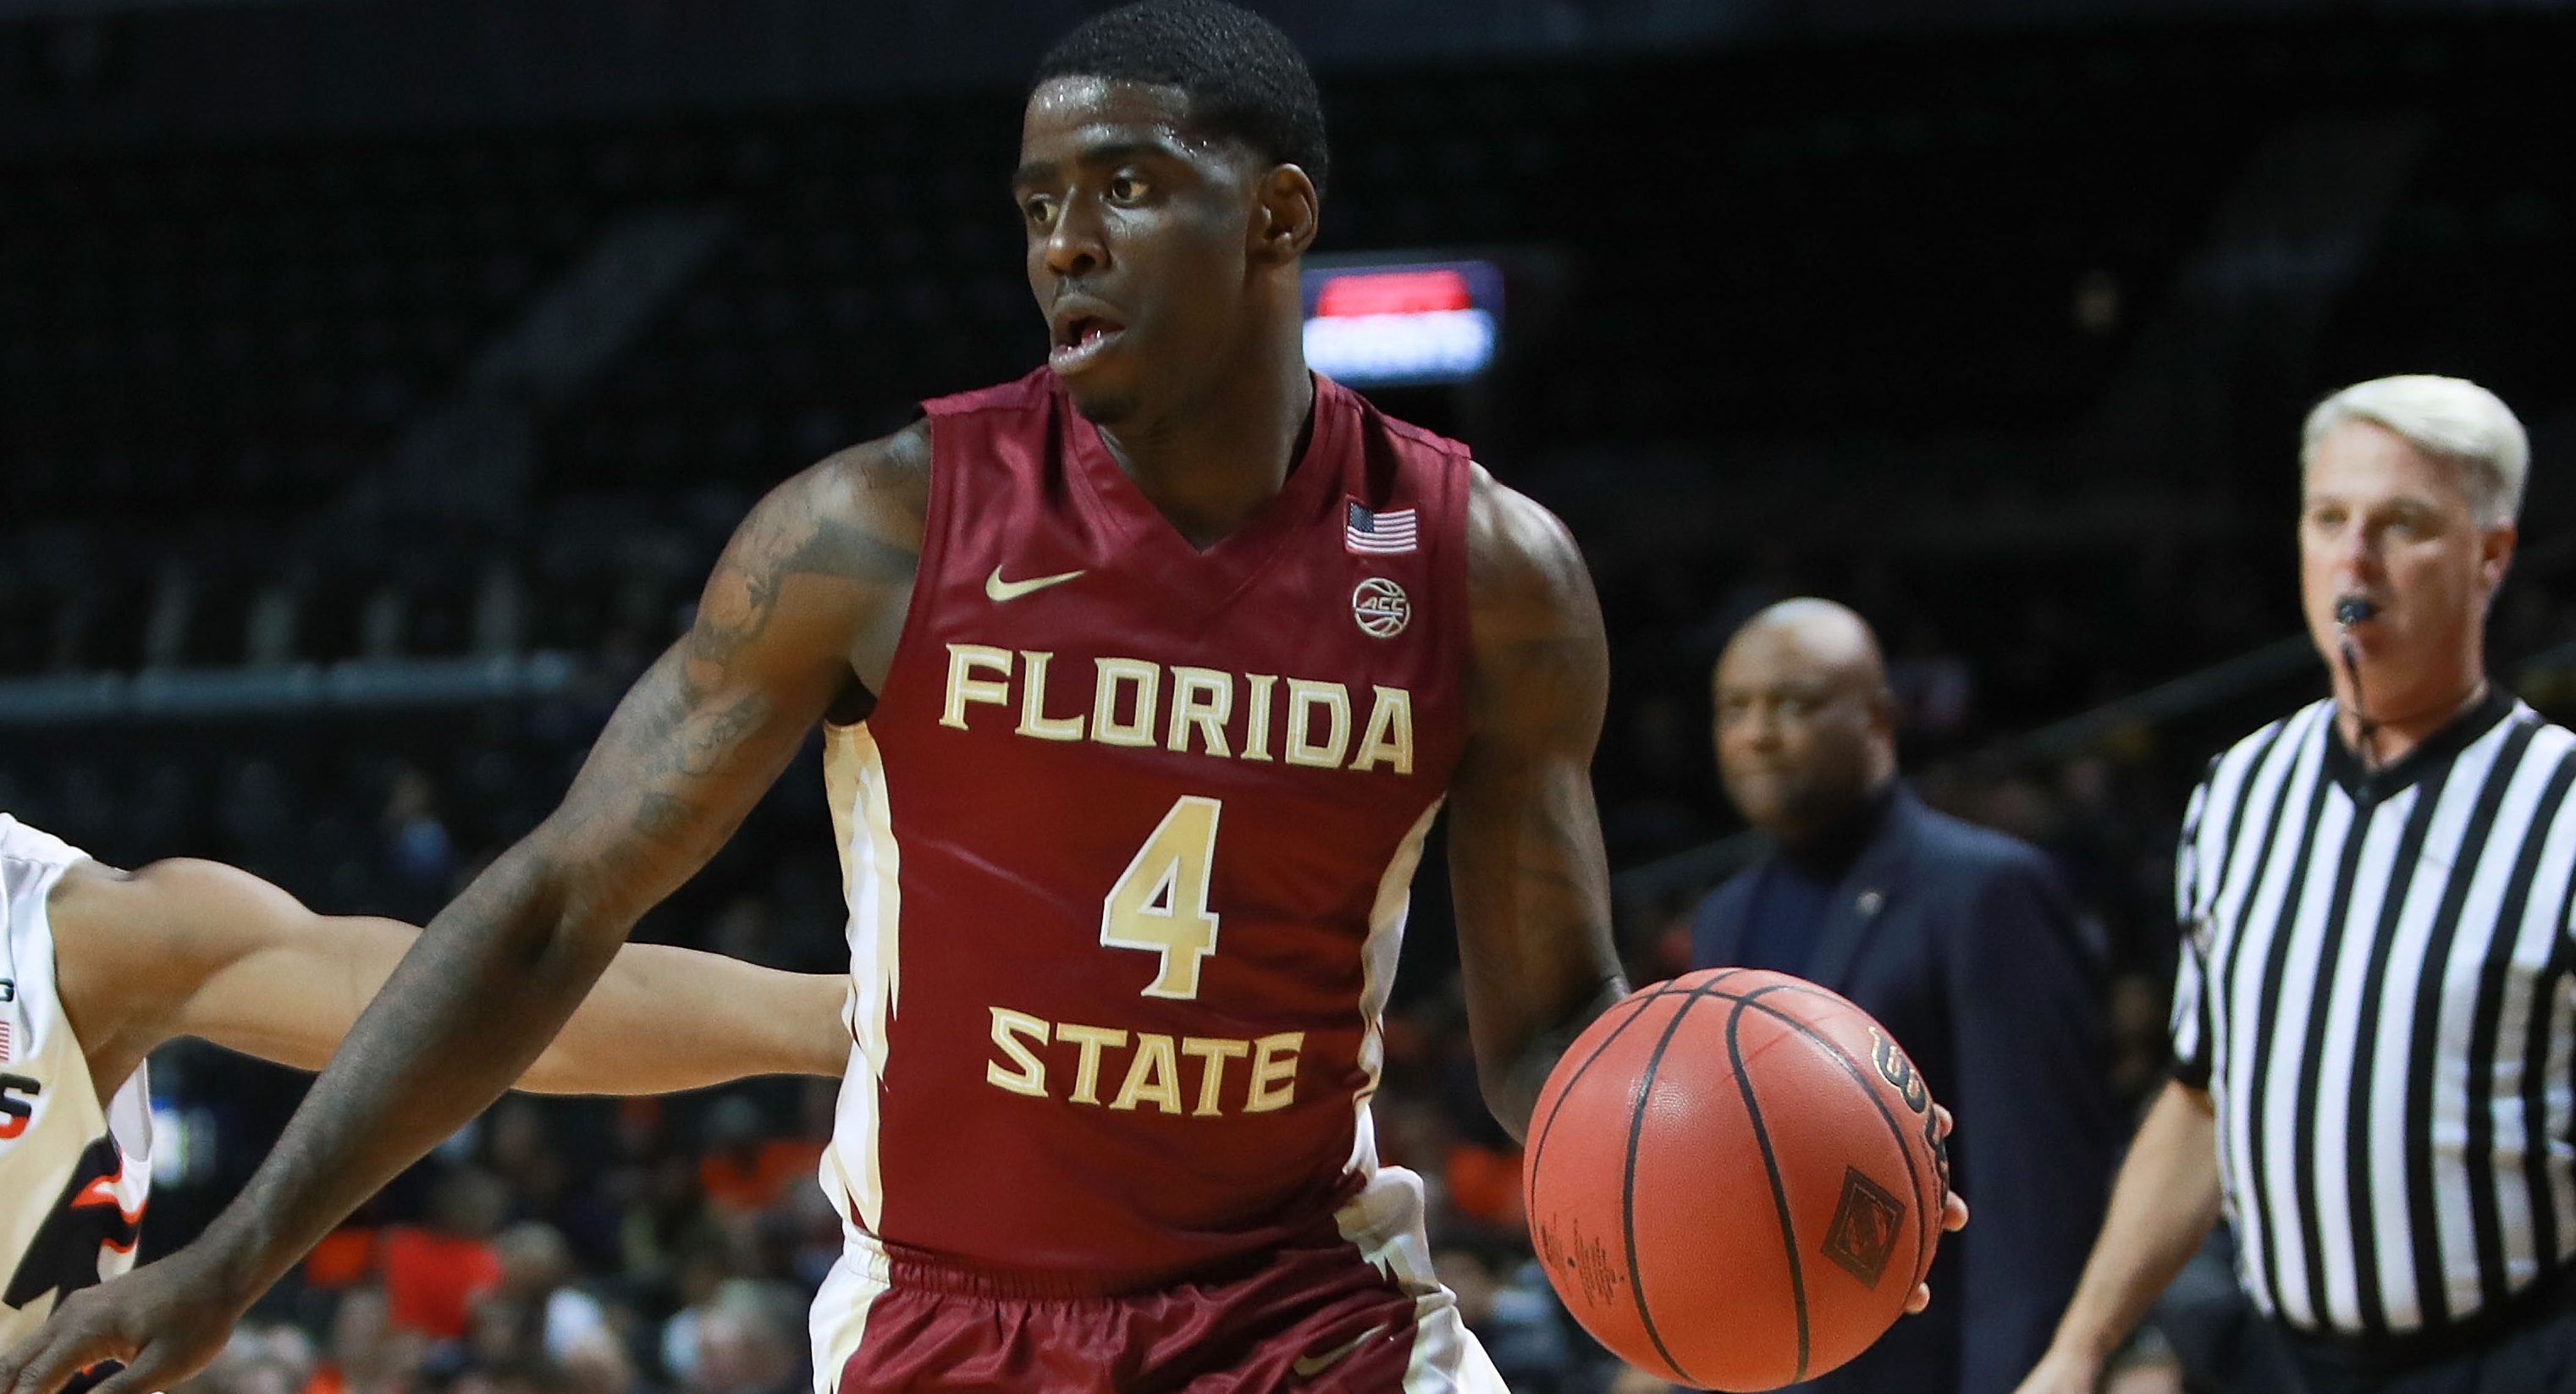 NEW YORK, NY - NOVEMBER 25: Dwayne Bacon #4 of the Florida State Seminoles drives to the basket against the Illinois Fighting Illiniin the second half during the consolation game of the NIT Season Tip-Off at Barclays Center on November 25, 2016 in the Brooklyn borough of New York City. (Photo by Michael Reaves/Getty Images)